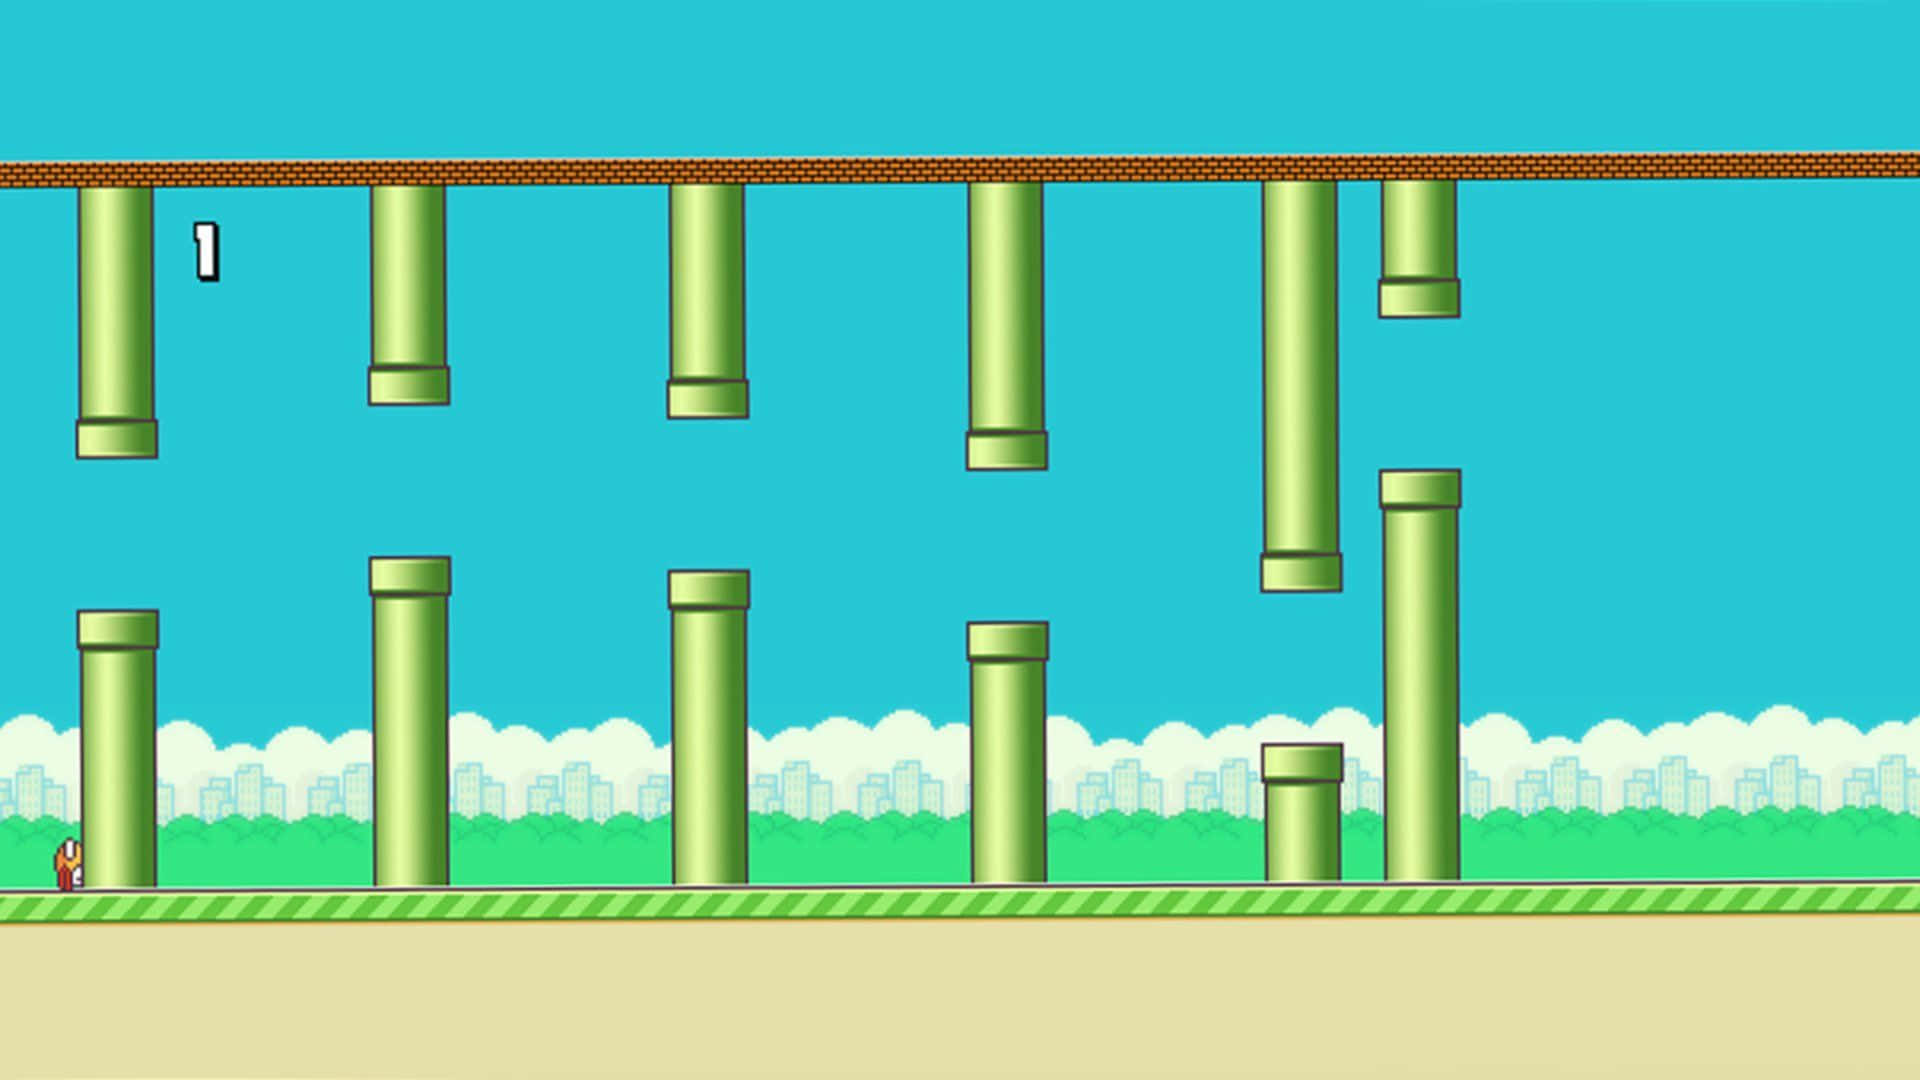 A Game With A Bird Flying Over A Bamboo Bridge